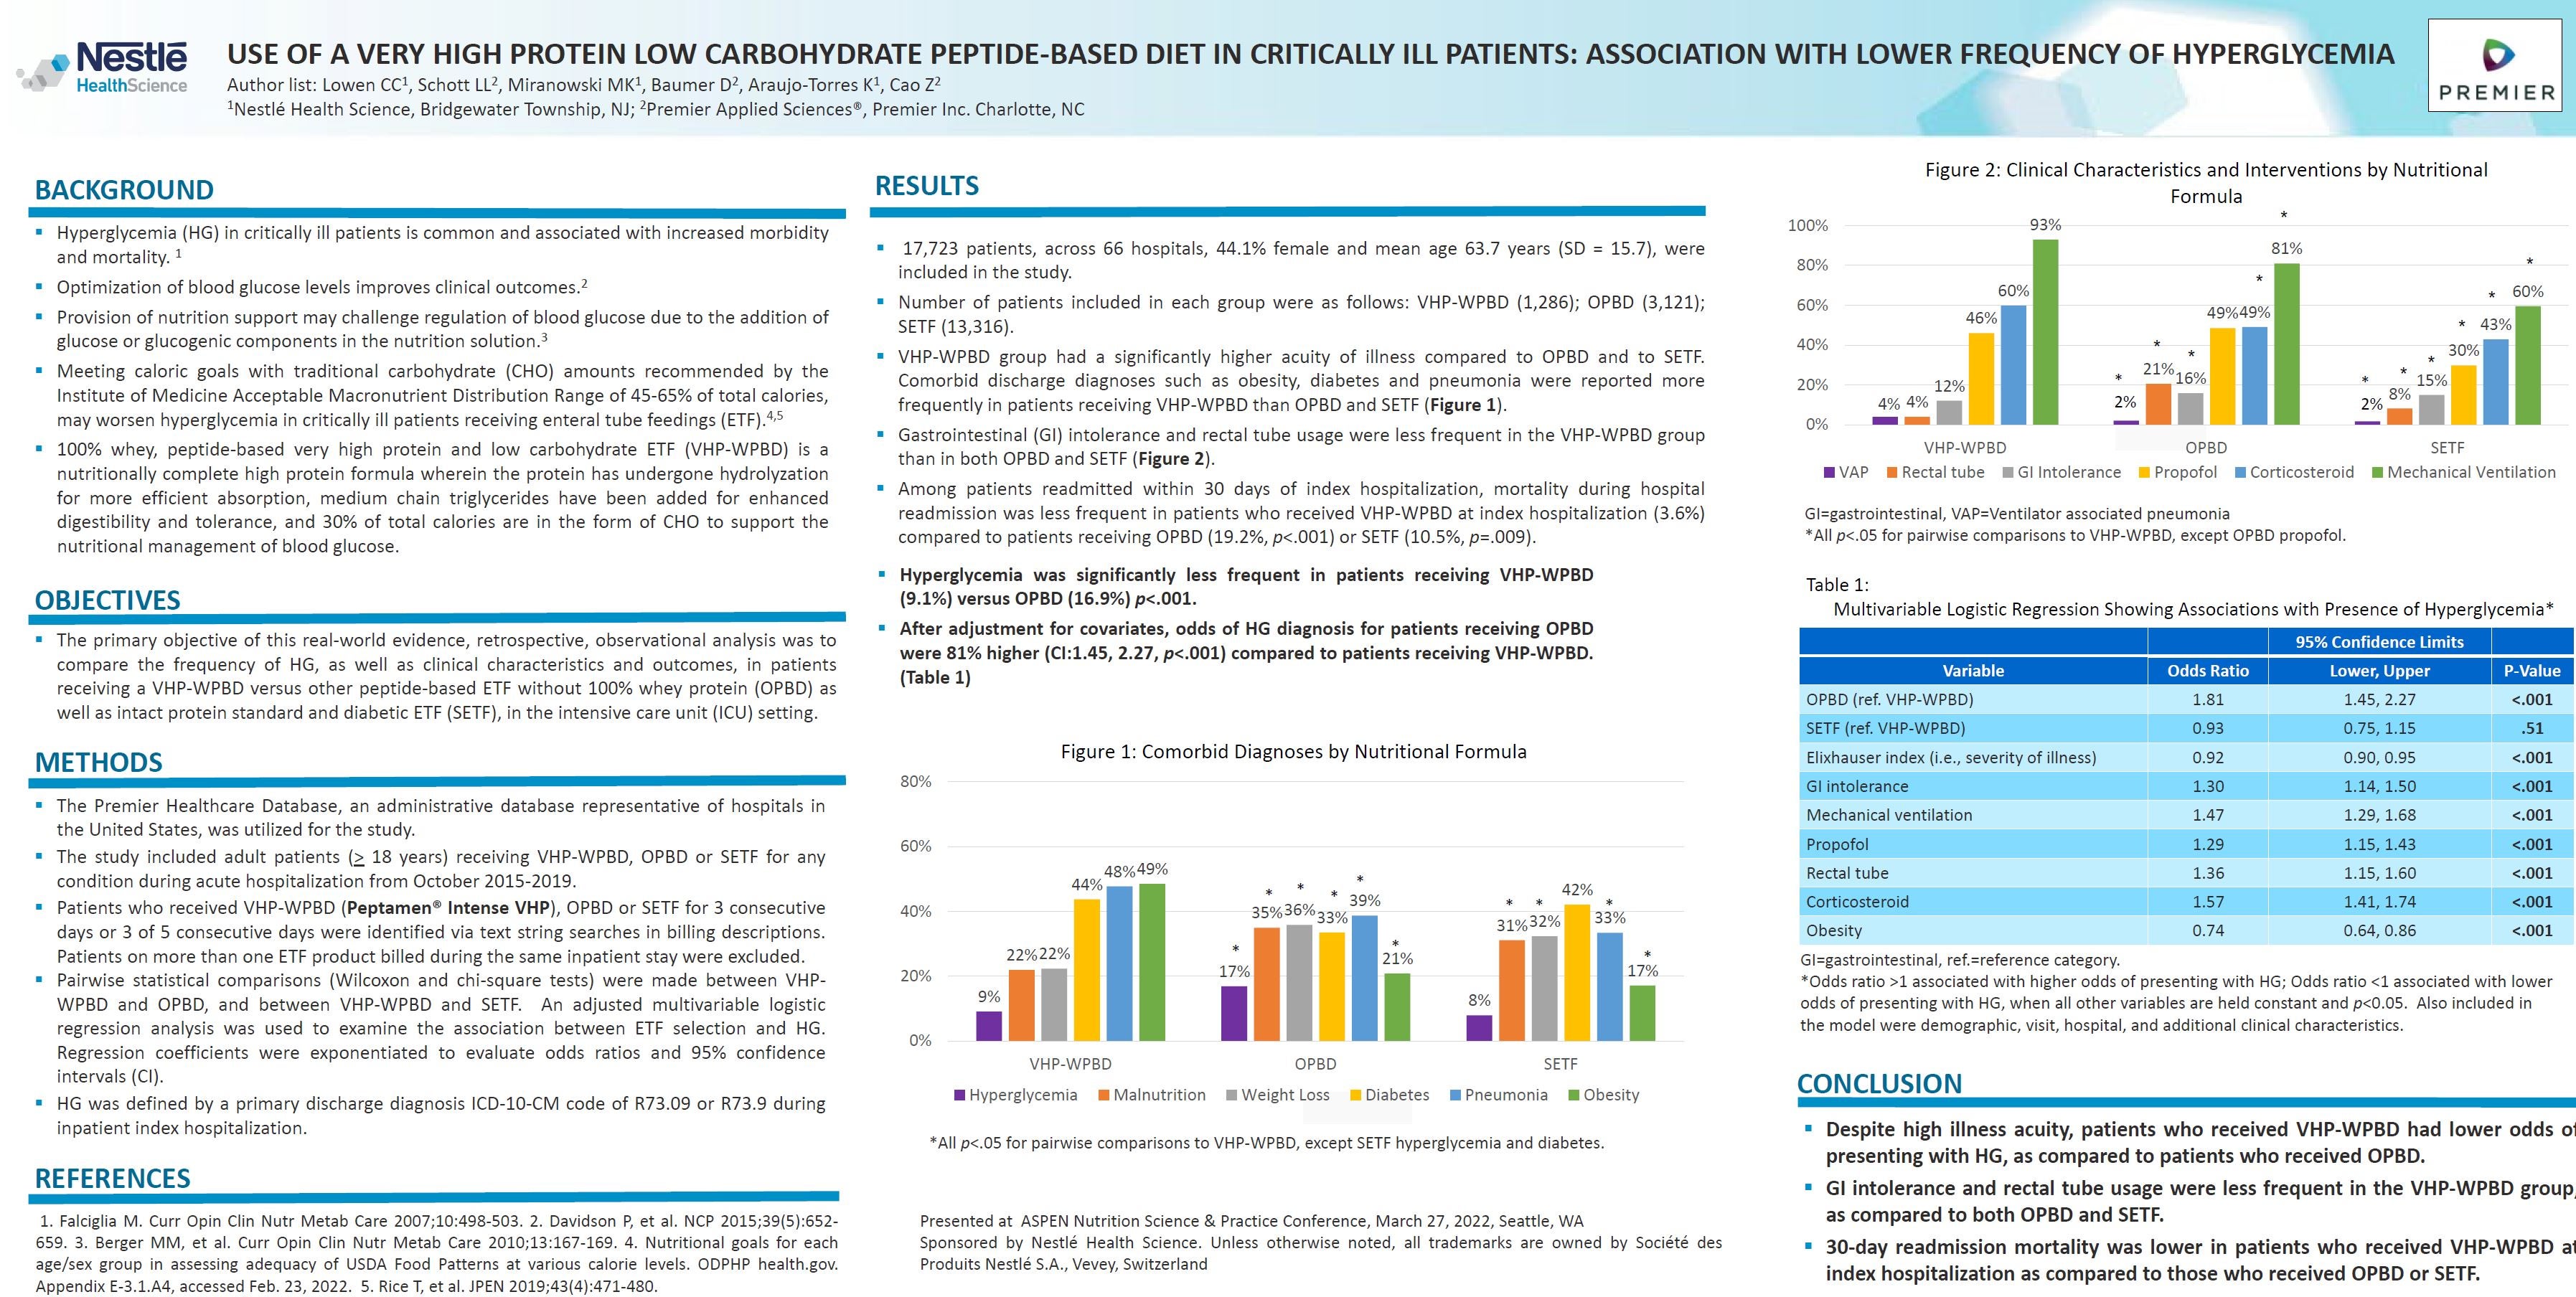 Poster: ASPEN 2022 Use of 100% Whey Protein Formula in Patients with Hyperglycemia